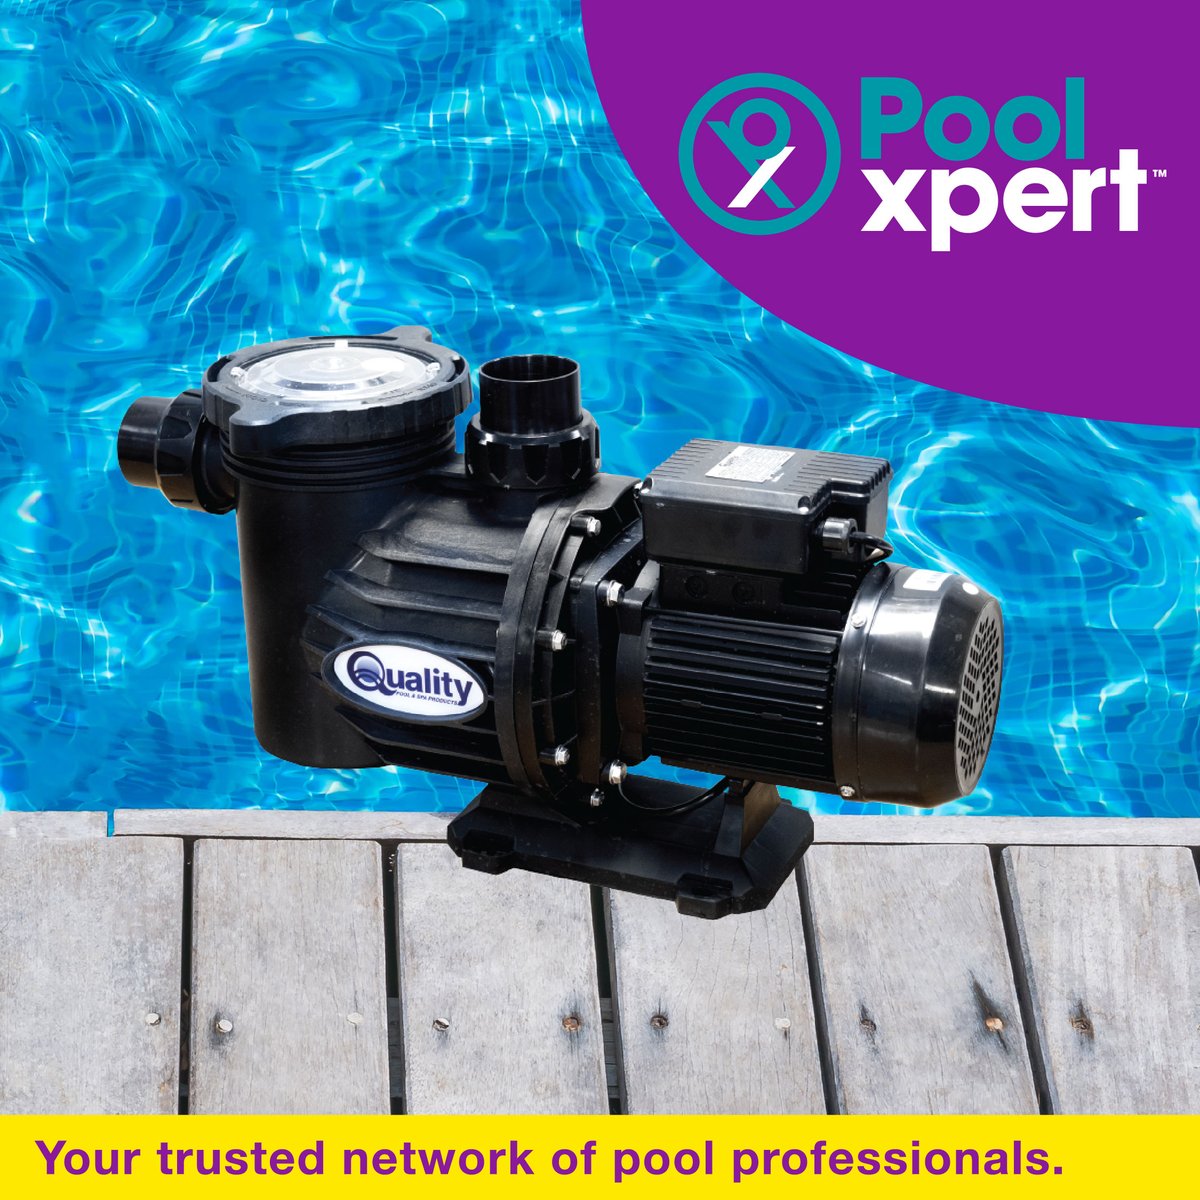 🔄Our Swimflo2 isn't just any pump. It's engineered for South African challenges - resilient, reliable, and top-notch. Consult our Xperts today.

💧 Talk to Us: brnw.ch/21wCsyN

#RuggedReliability #PoolXpert #Swimflo2 #PowerPump